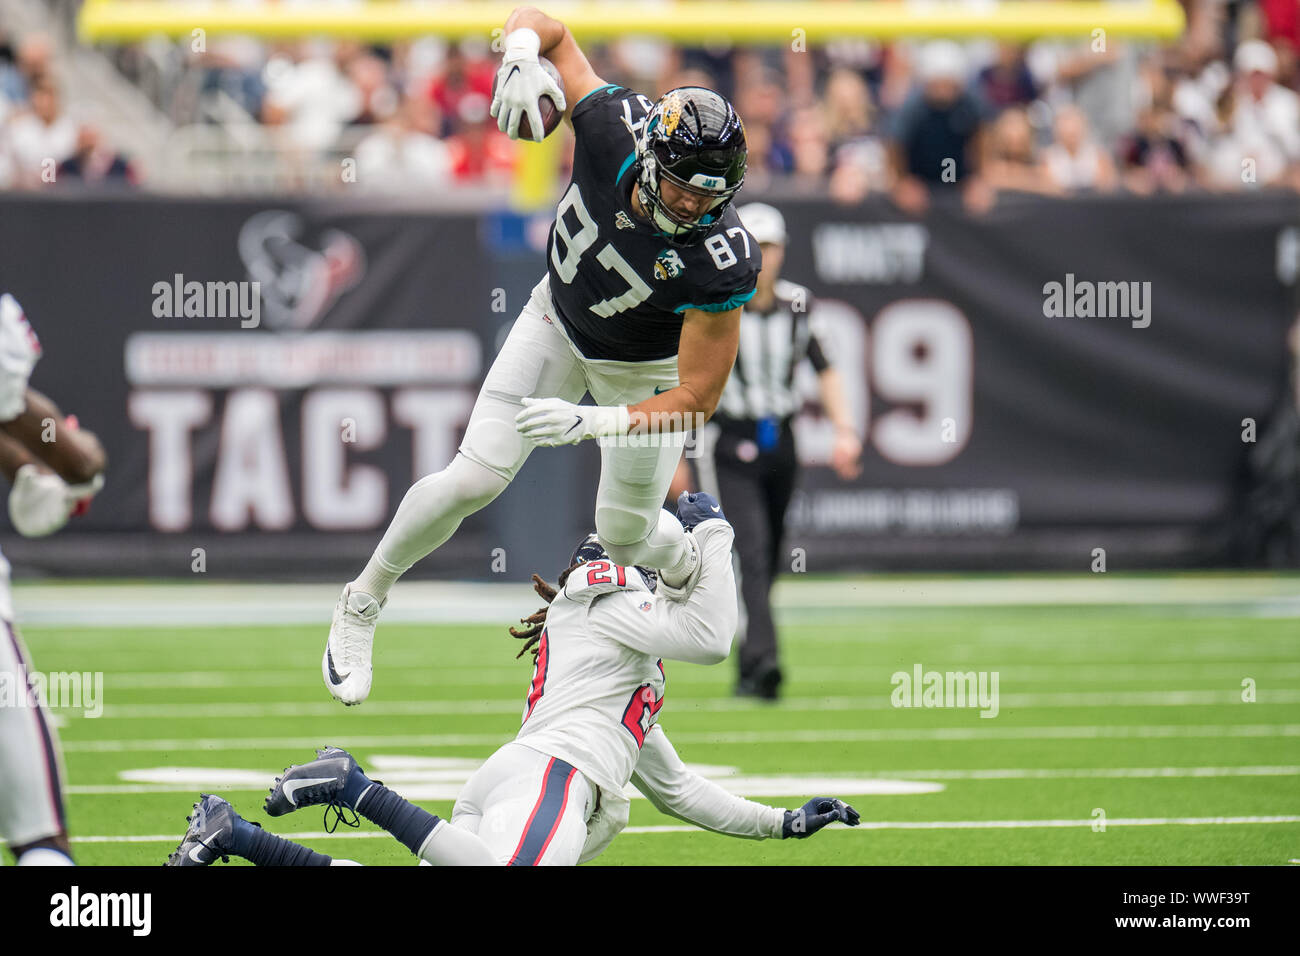 Houston, TX, USA. 15th Sep, 2019. Jacksonville Jaguars tight end Geoff Swaim (87) tries to leap over Houston Texans cornerback Bradley Roby (21) during the 2nd quarter of an NFL football game between the Jacksonville Jaguars and the Houston Texans at NRG Stadium in Houston, TX. The Texans won the game 13 to 12.Trask Smith/CSM/Alamy Live News Stock Photo